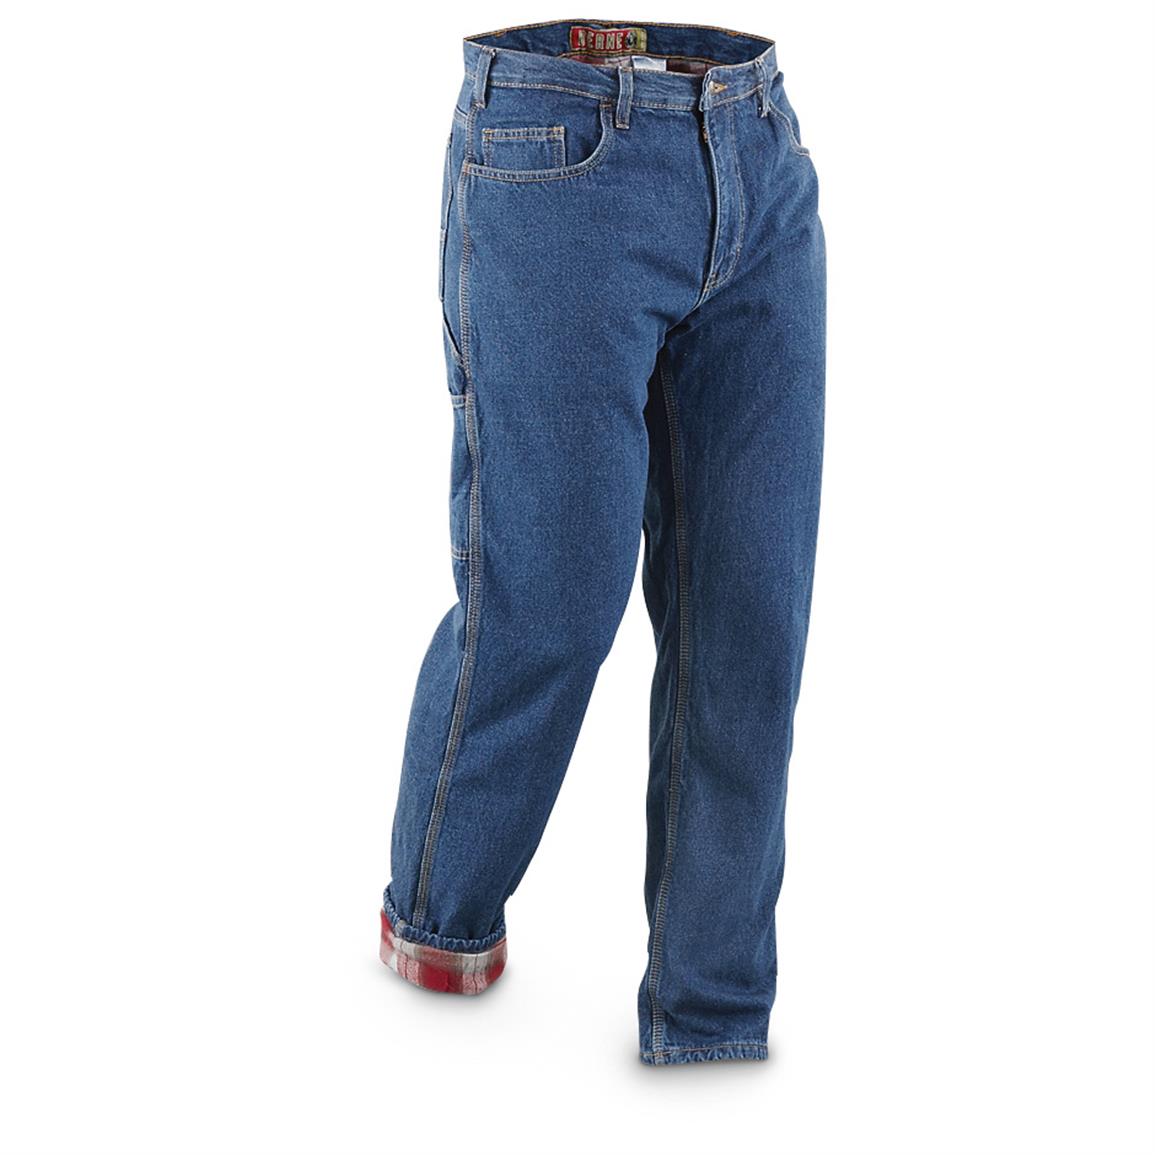 Berne Original Lined Dungaree Jeans - 614593, Insulated Pants, Overalls ...